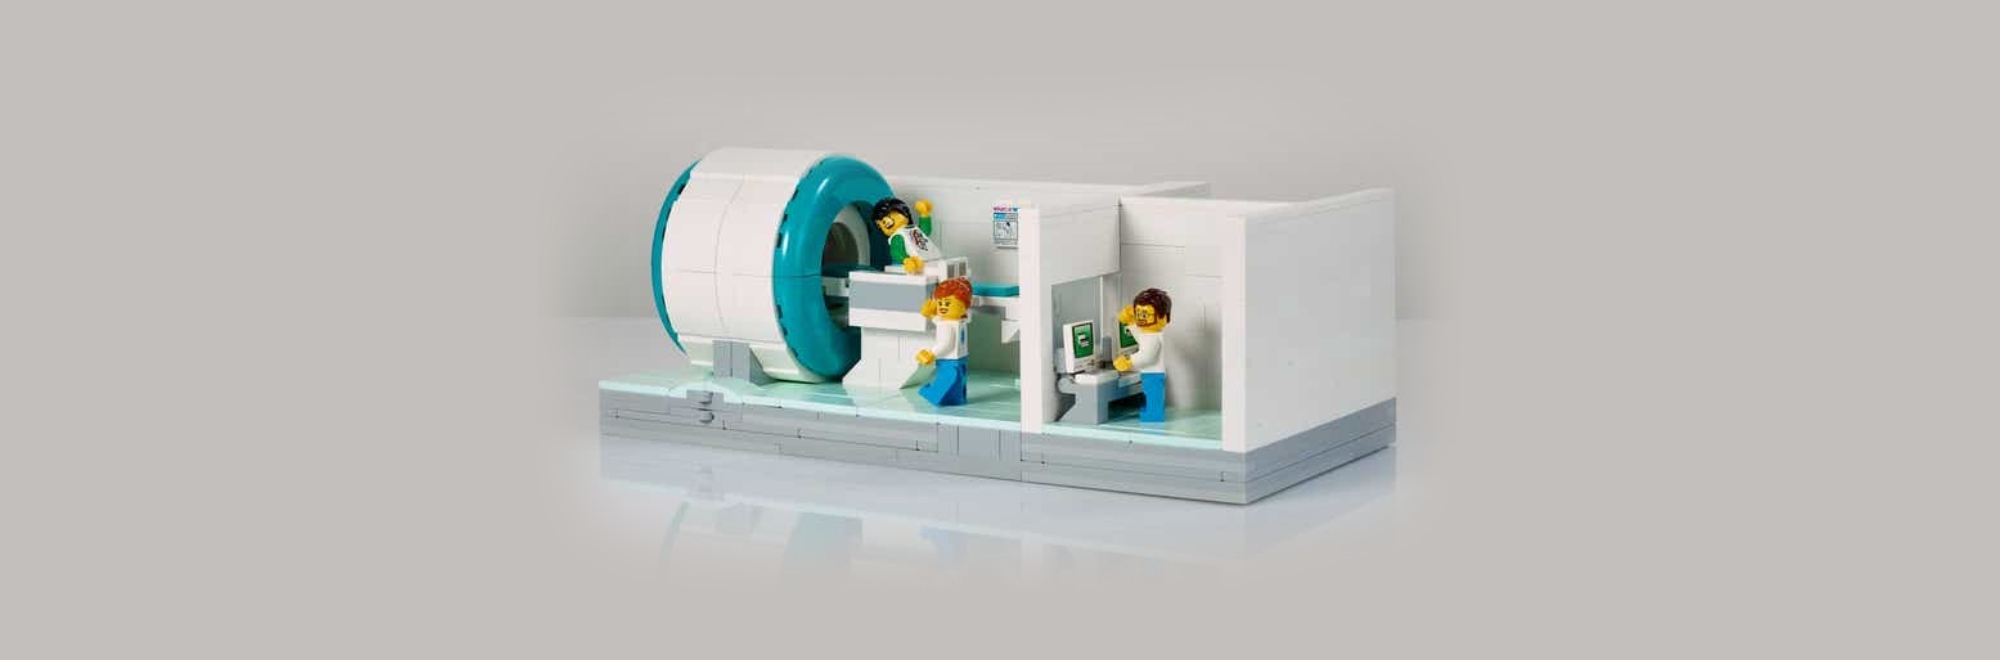 Creative Corner: Lego's MRI scanner, Dying Light 2 billboard, IKEA's 3D meatballs and Netflix's All Of Us Are Dead